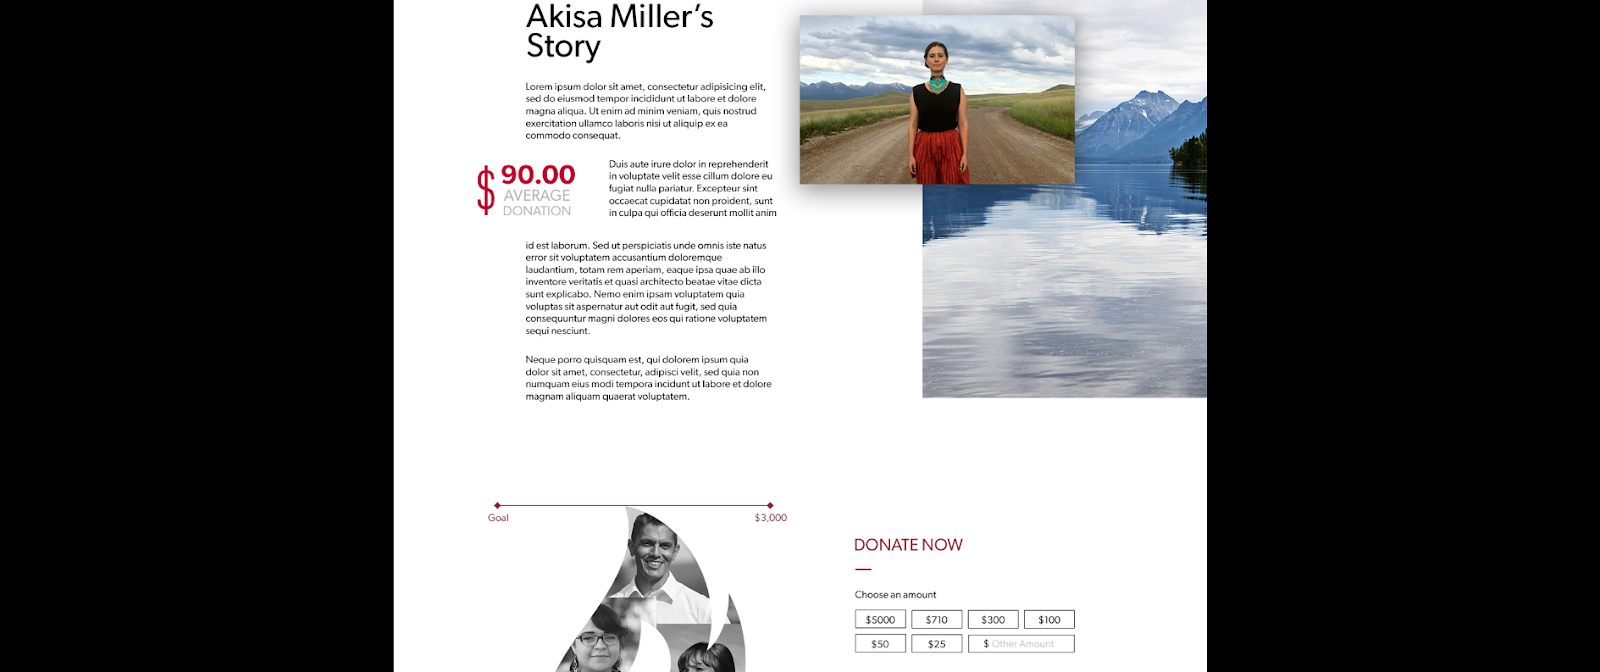 AICF akisa millers story page example